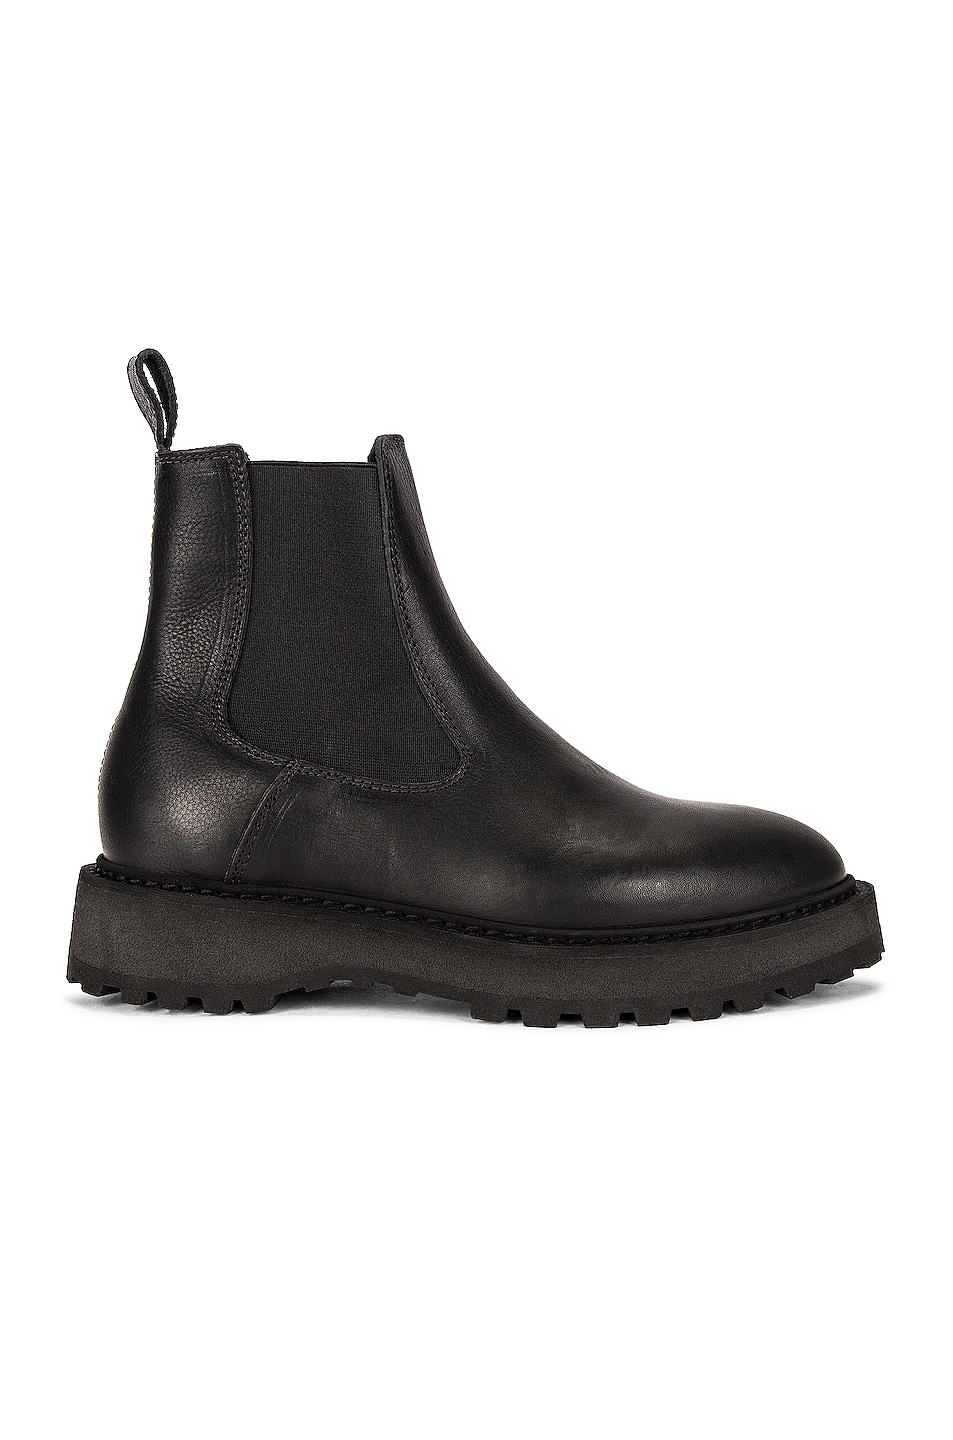 Image 1 of Diemme Alberone Boot in Black Leather